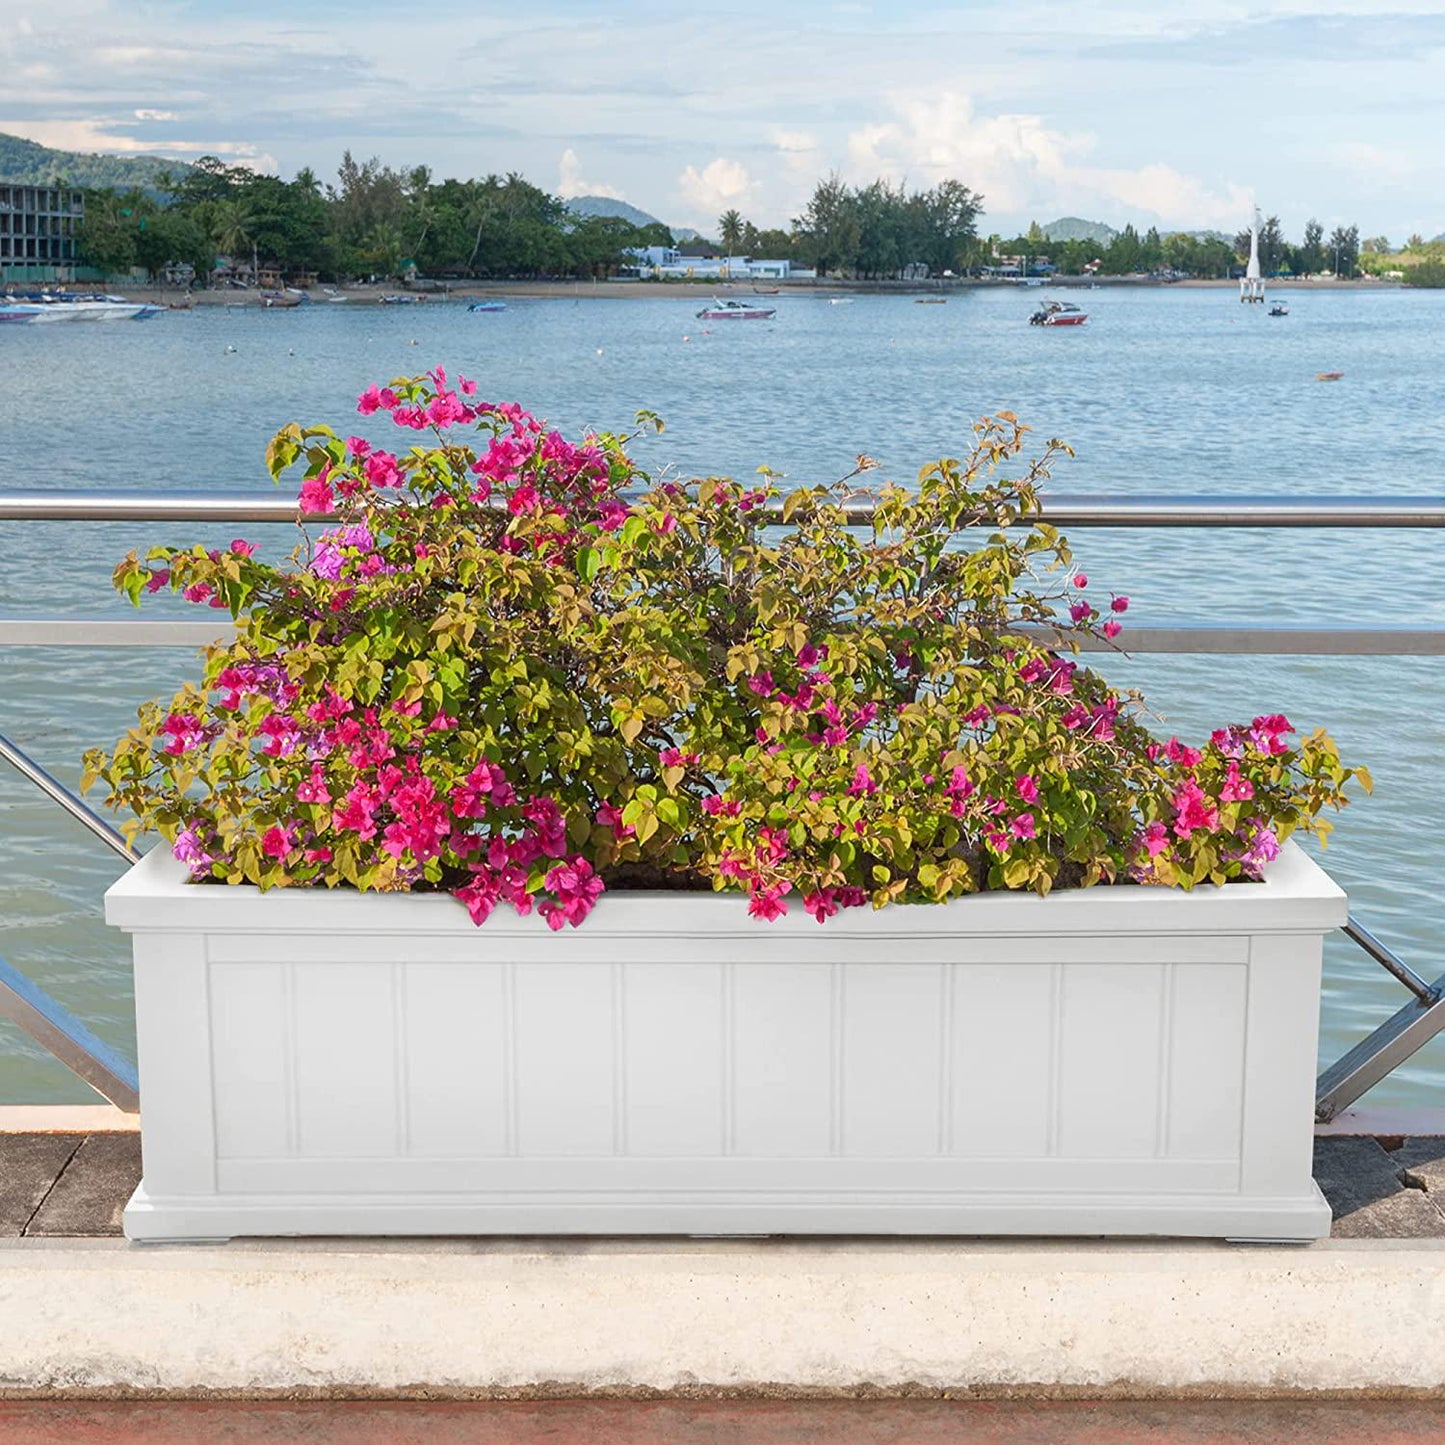 Mayne Cape Cod 3ft Window Box - White - 36in L x 11in W x 10.8in H - with 6.5 Gallon Built-in Water Reservoir (4840-W)